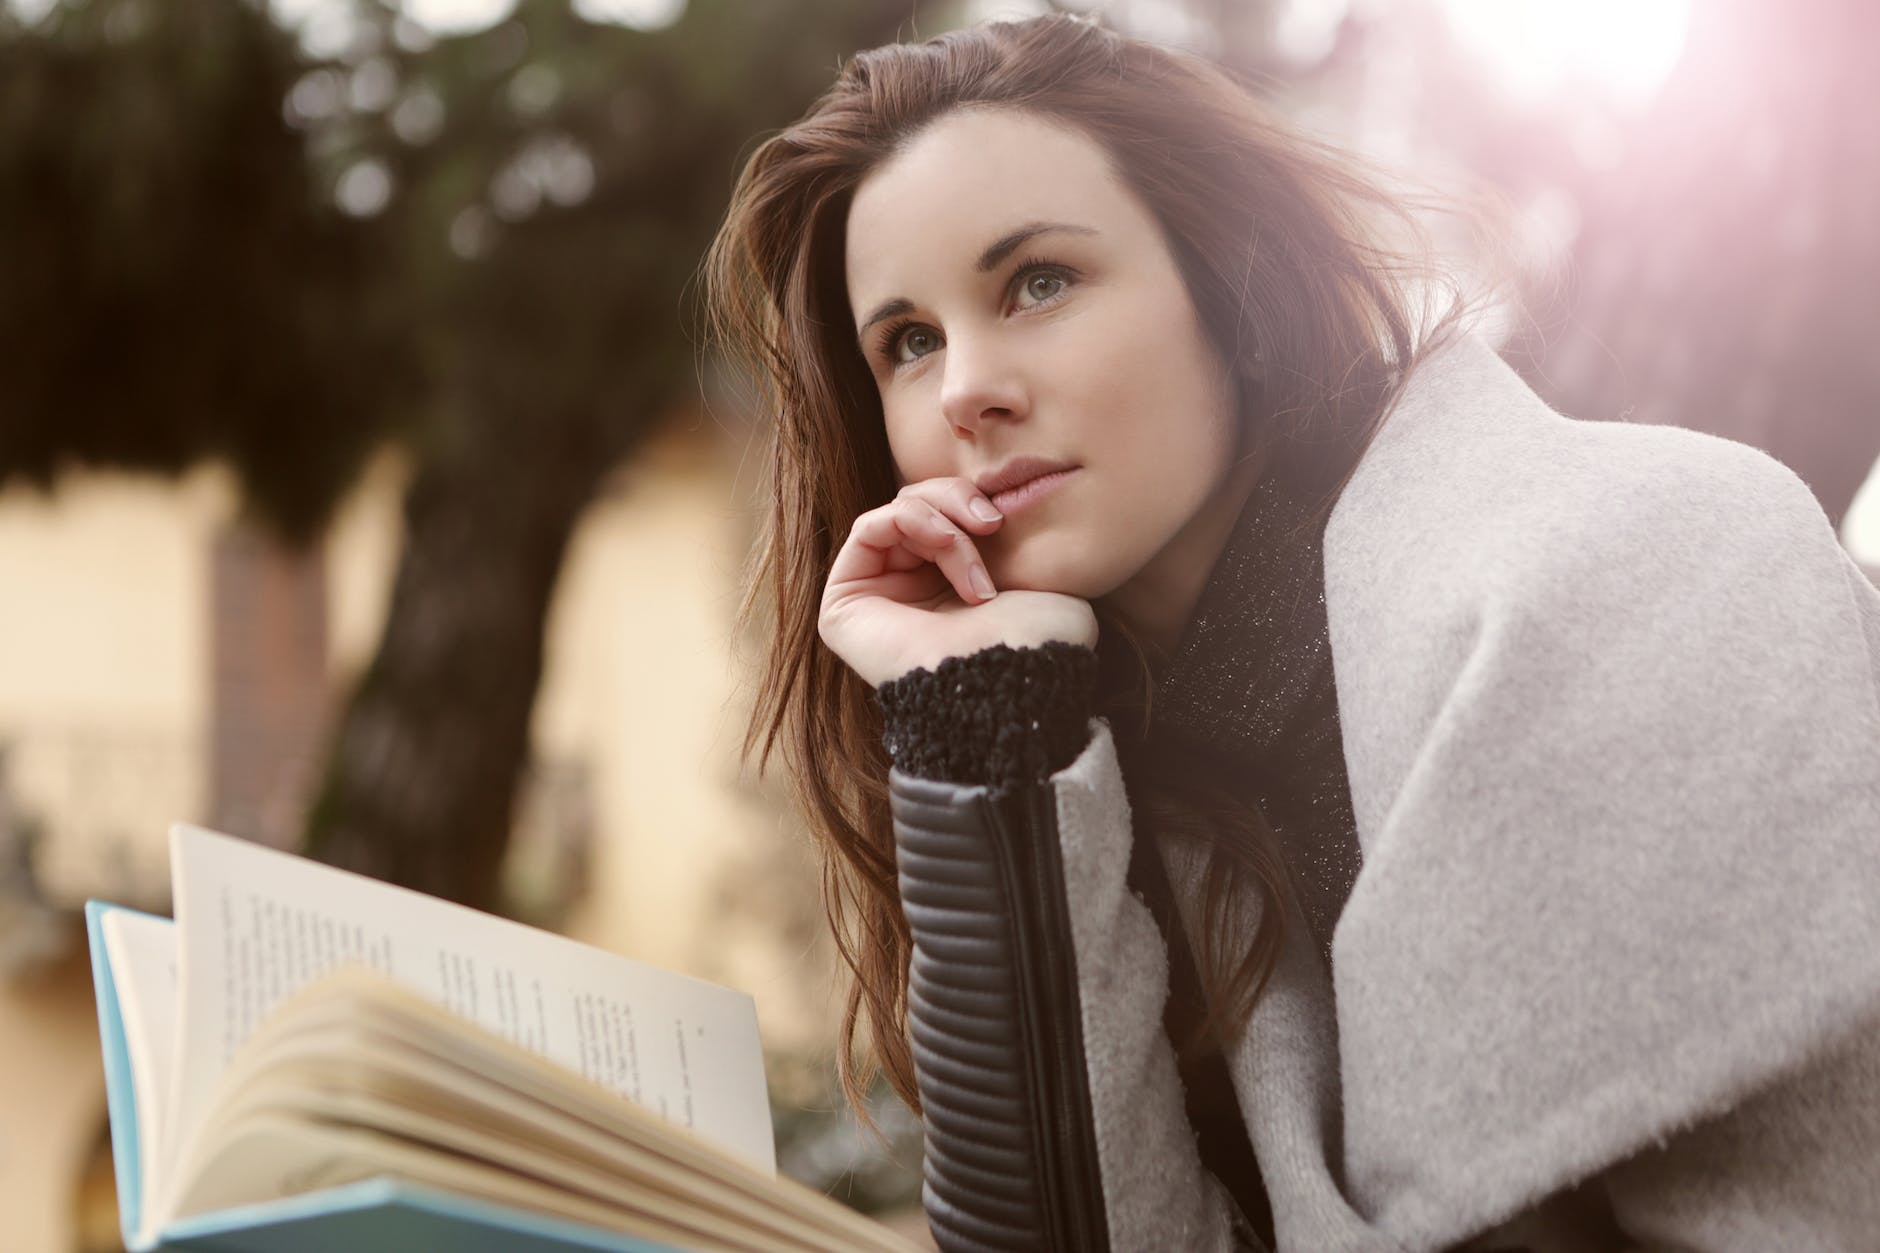 A woman is holding a book. She is outdoors. Her hair is long, straight and dark. She is wearing a gray coat and seems to be thinking about something.